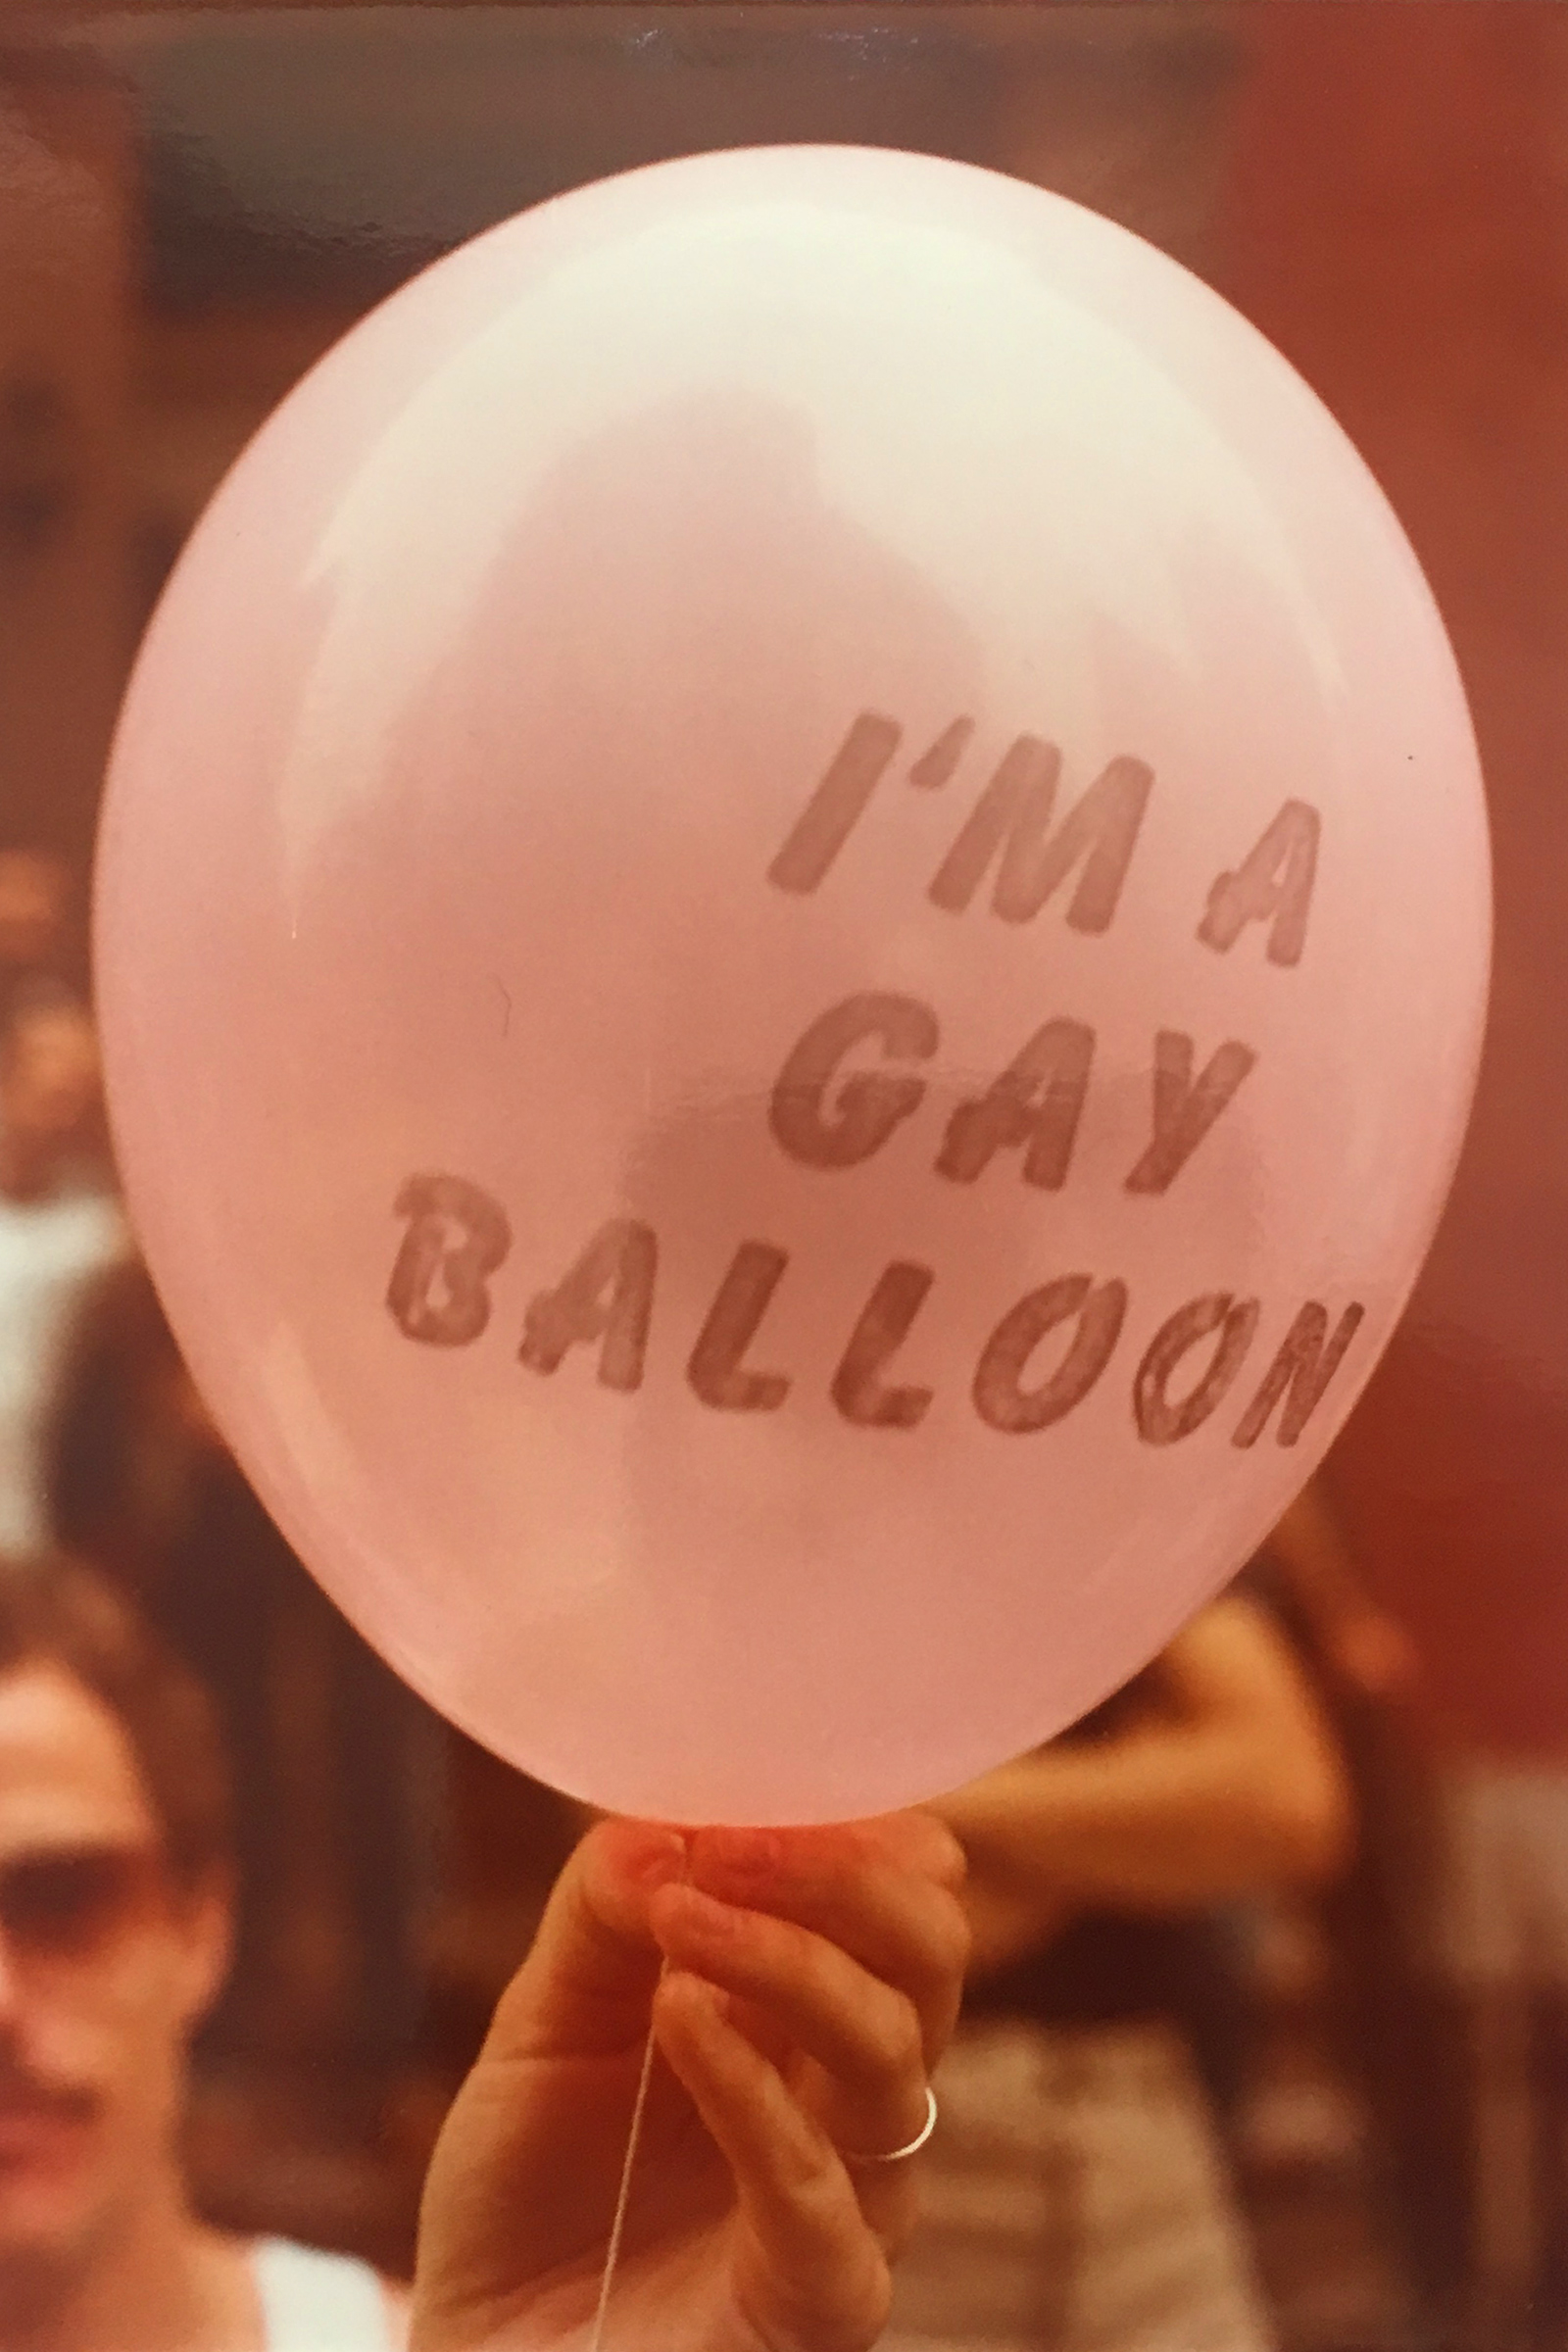 Balloon with the words  I'M A GAY BALLOON  printed on it, 1980